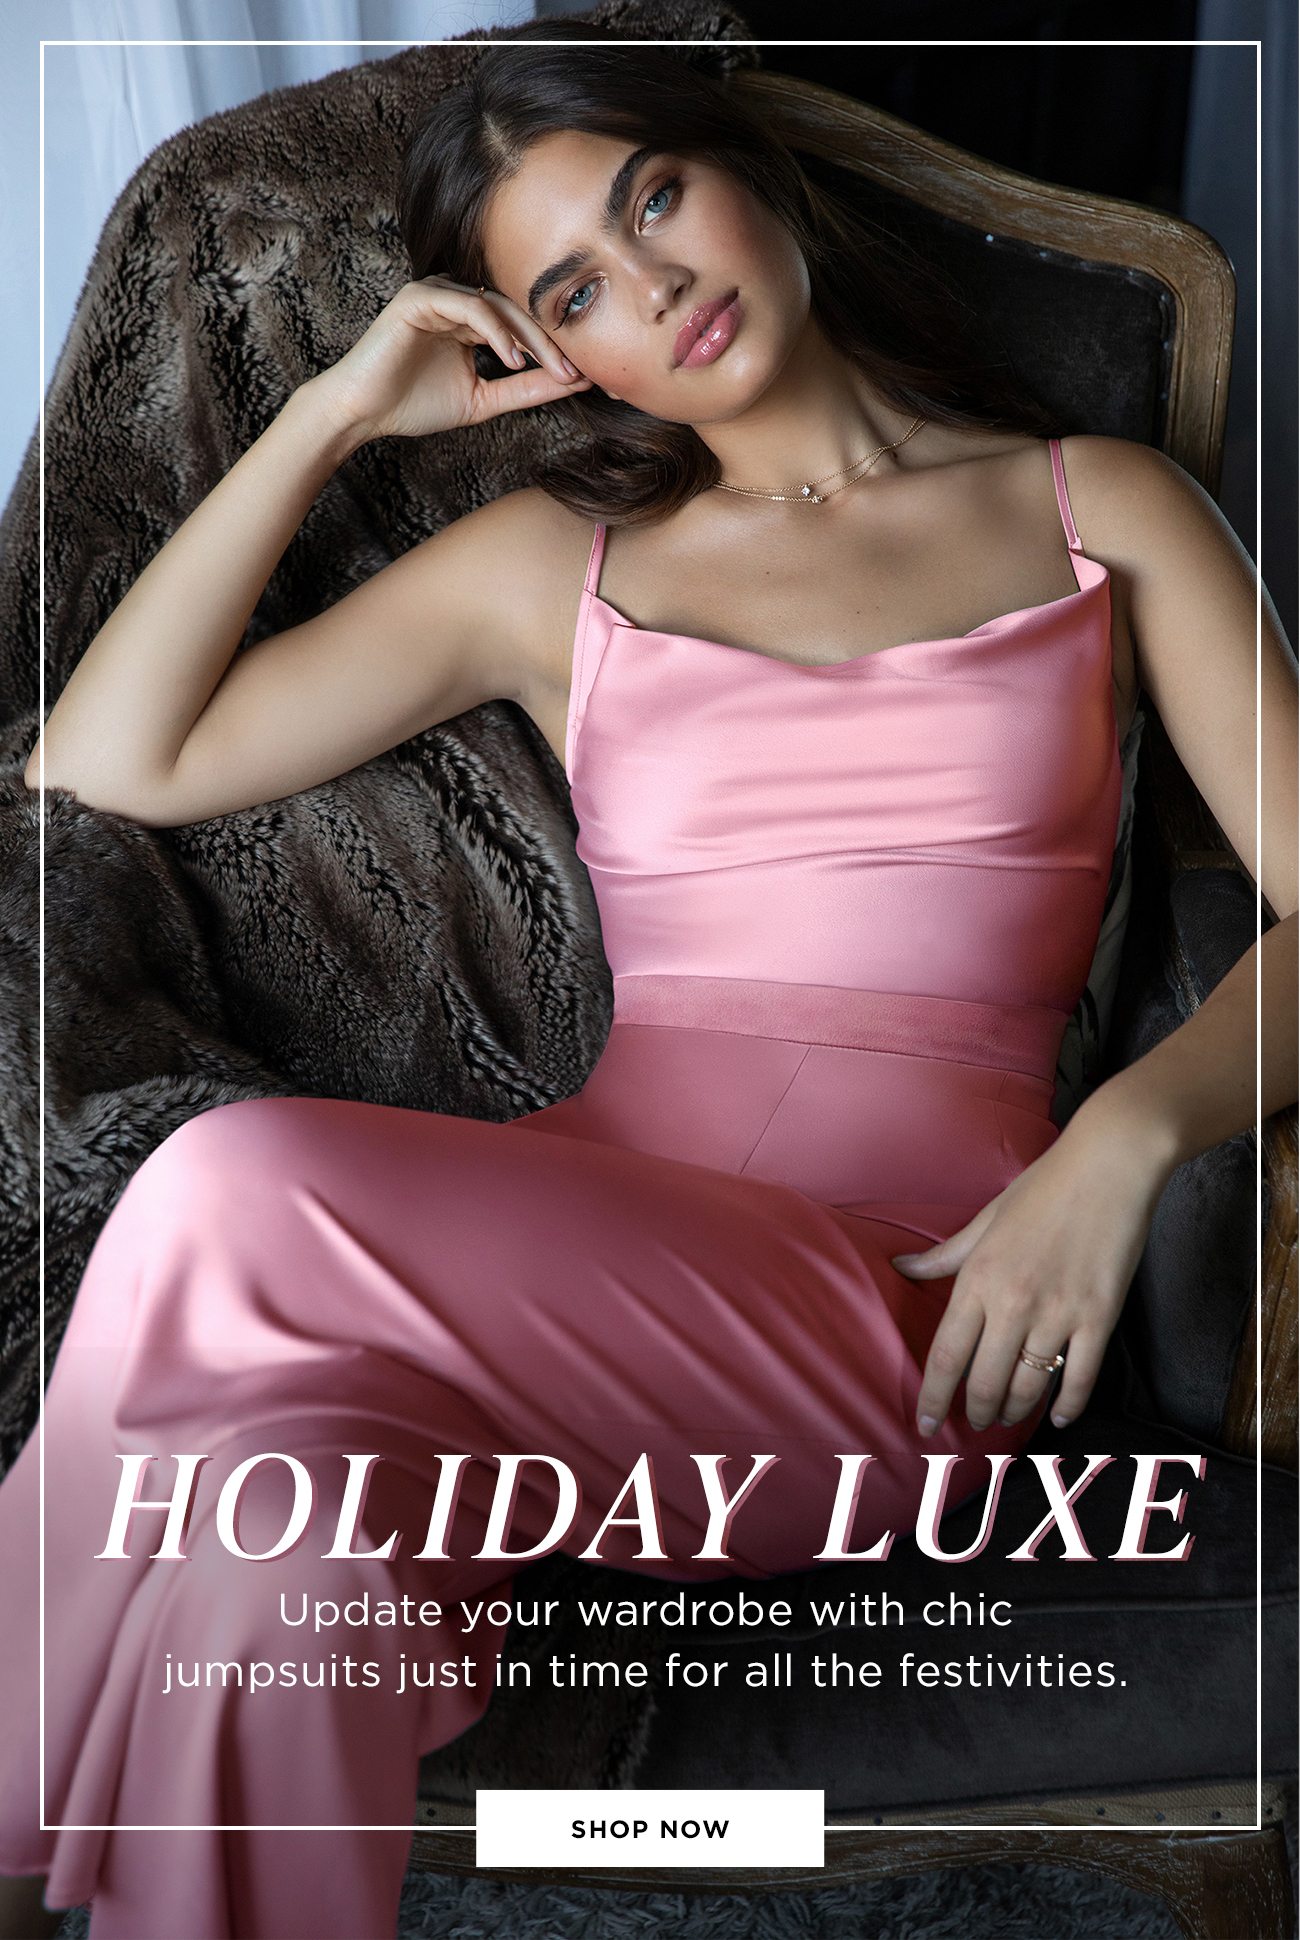 Holiday Luxe - Update your wardrobe with chic jumpsuits just in time for all the festivities.